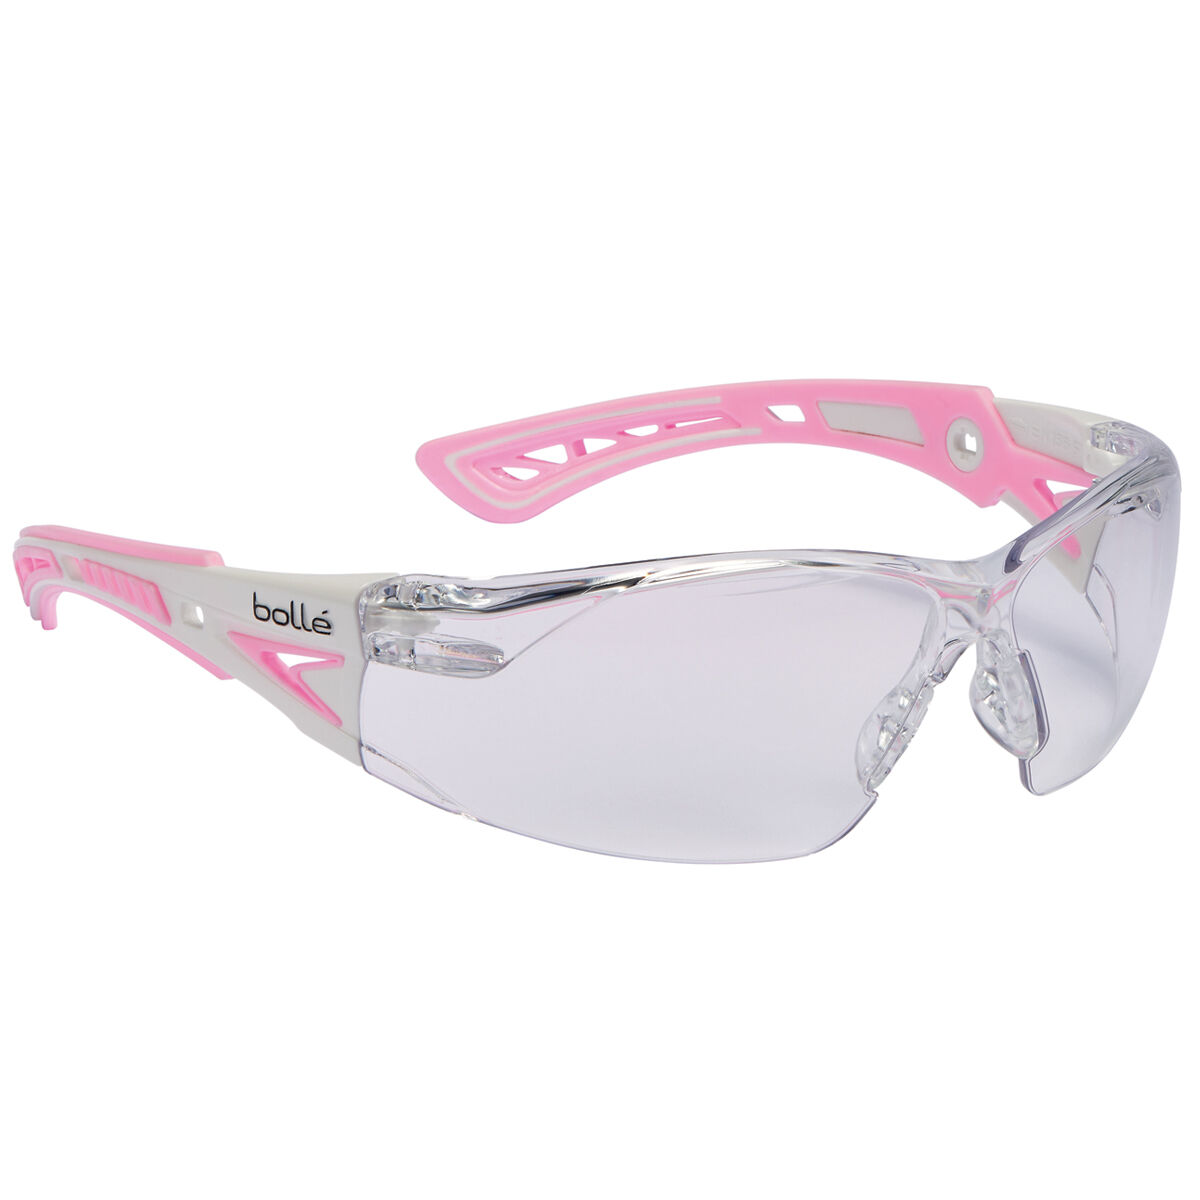 Bolle Rush PLUS SMALL sports style AS AF safety glasses specs spectacles 